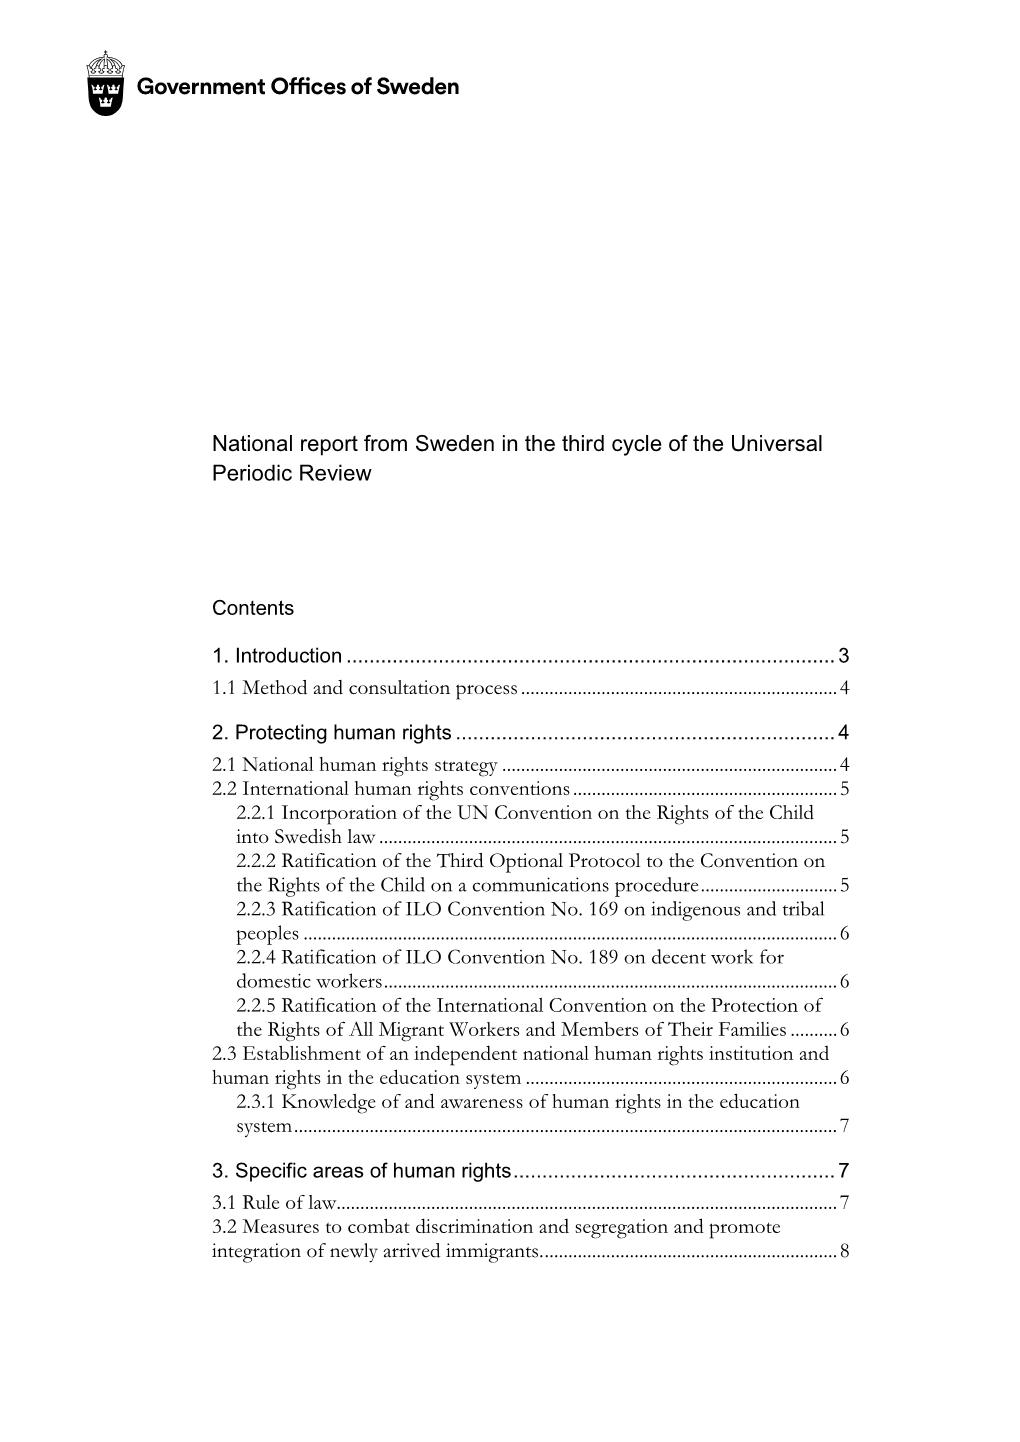 National Report from Sweden in the Third Cycle of the Universal Periodic Review